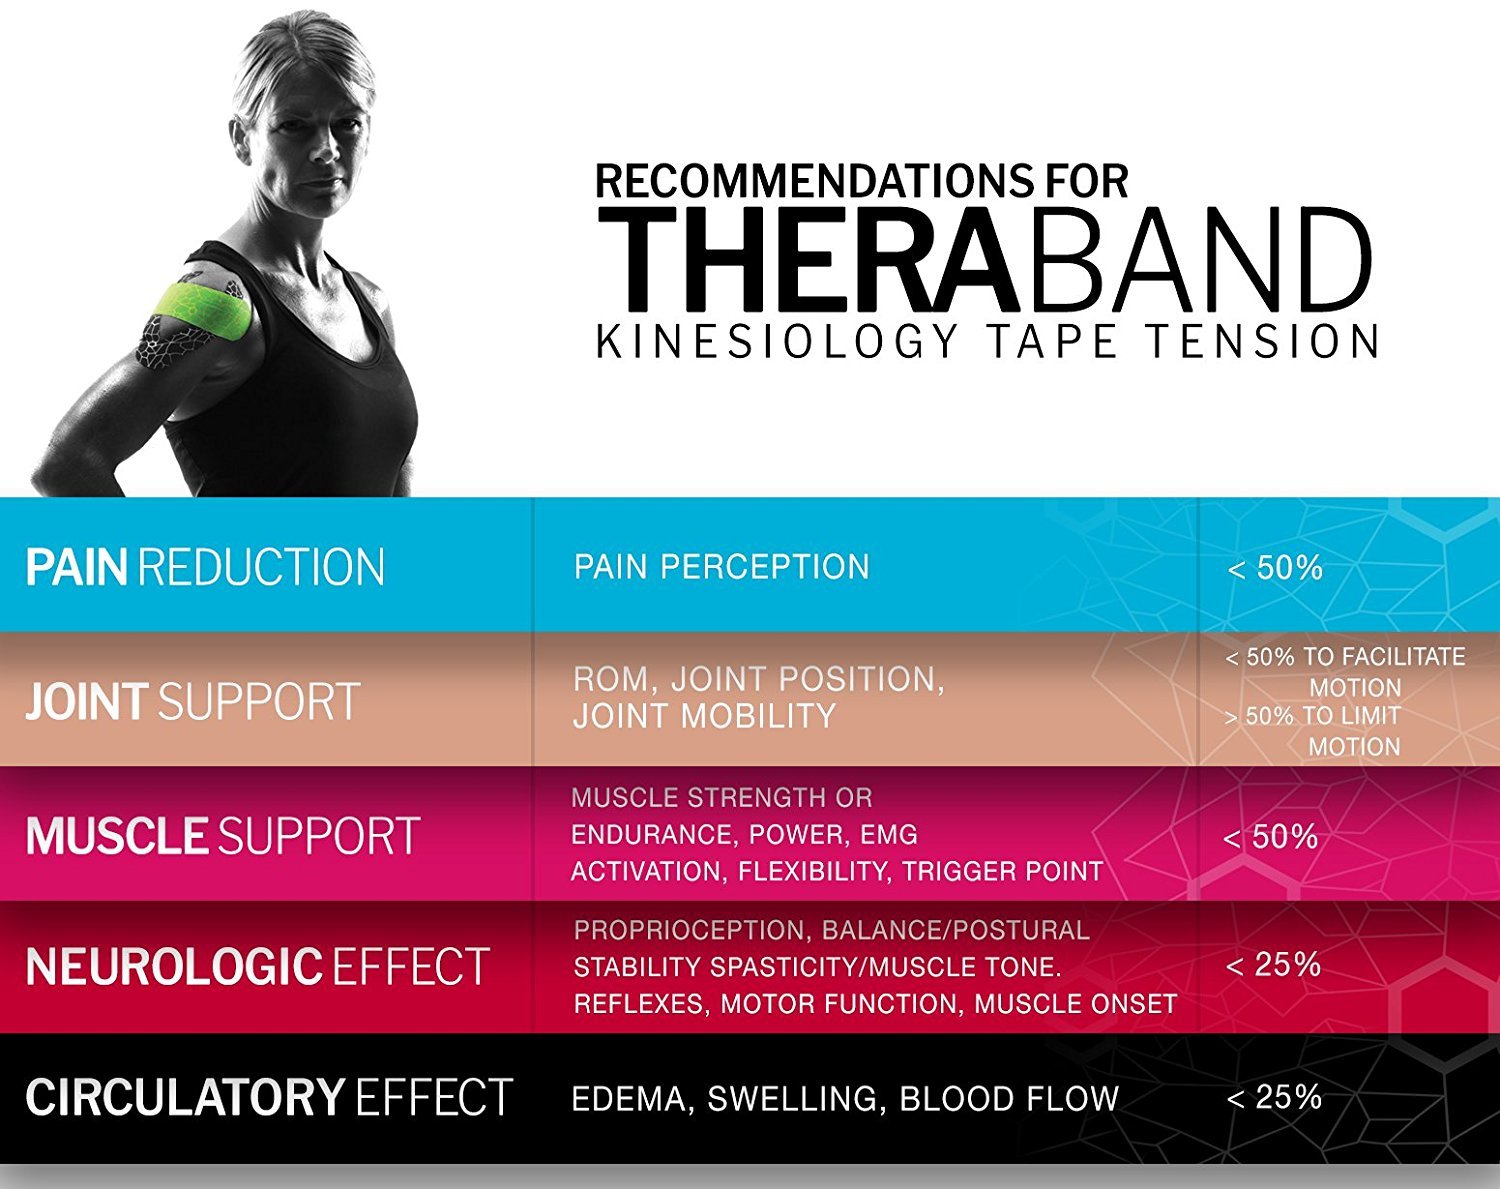 THERABAND Kinesiology Tape, Waterproof Physio Tape for Pain Relief, Muscle & Joint Support, Standard Roll with XactStretch Application Indicators, 2 Inch x 16.4 Foot Roll, Blue/Blue